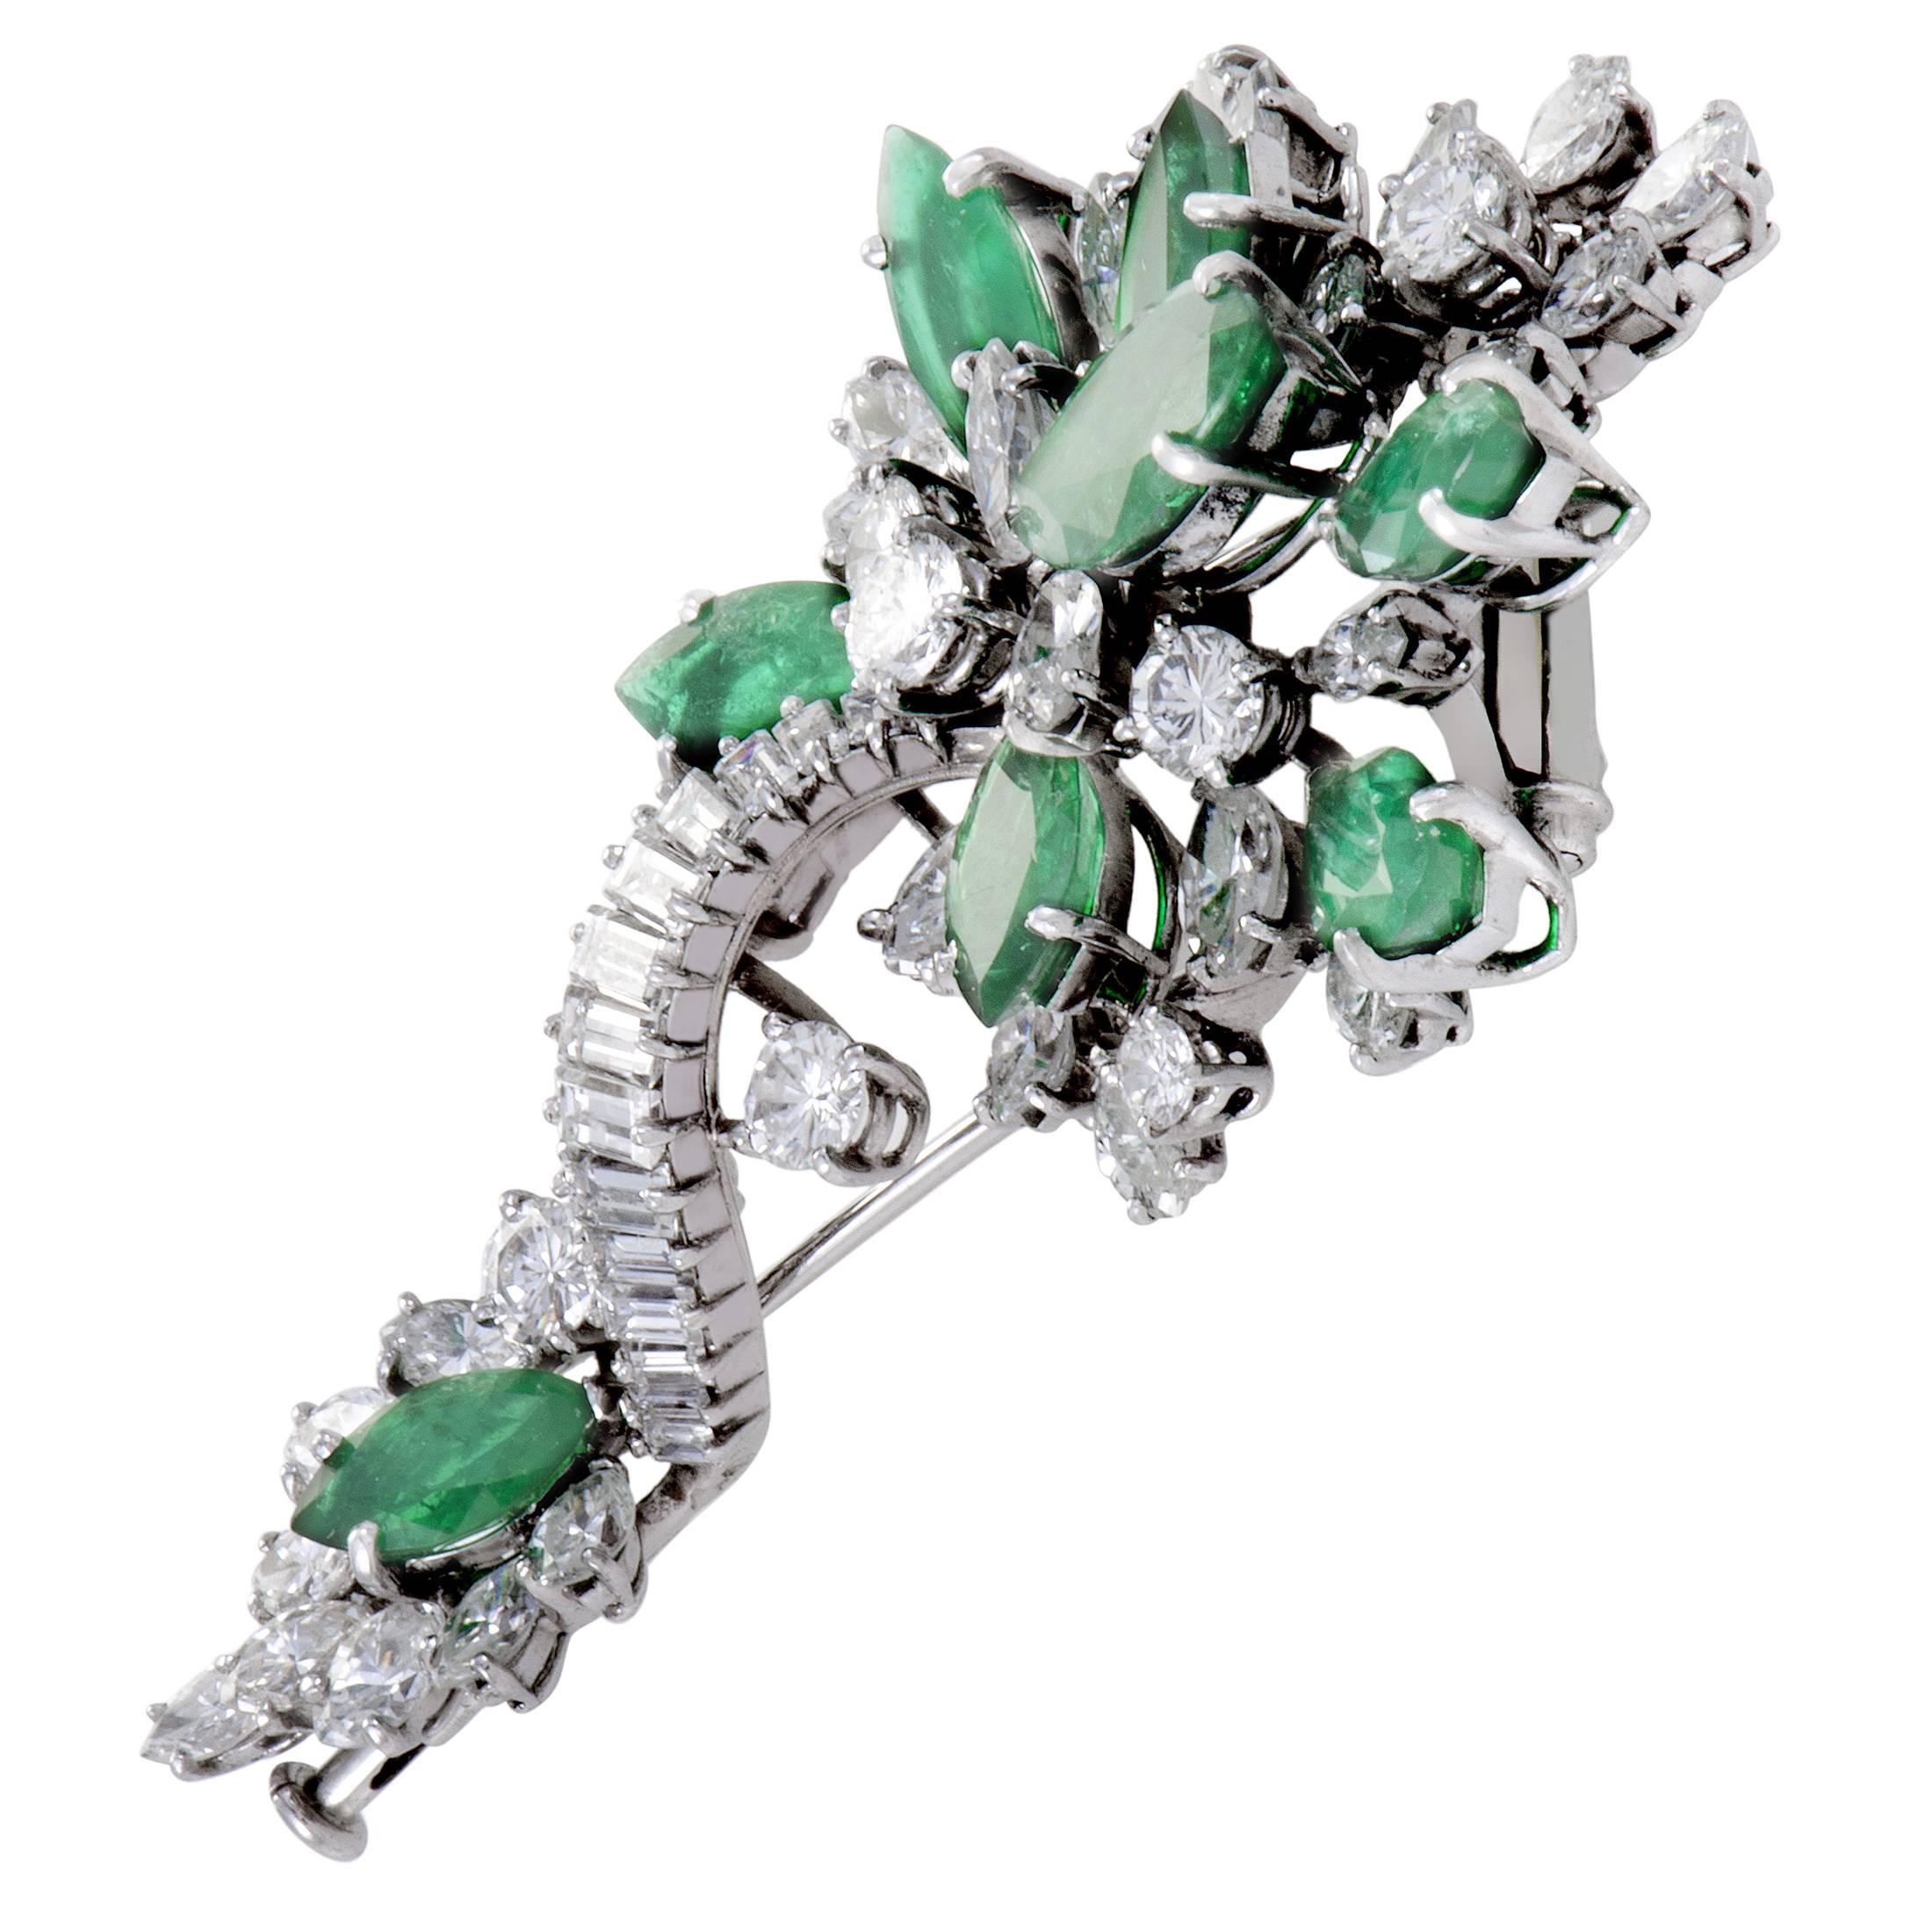 Lending their appealing and eye-catching color to a harmoniously bright design, stunning emeralds totaling 8.00 carats are scattered among sparkling diamonds amounting approximately to 7.00 carats in this stylish brooch made of 18K white gold.